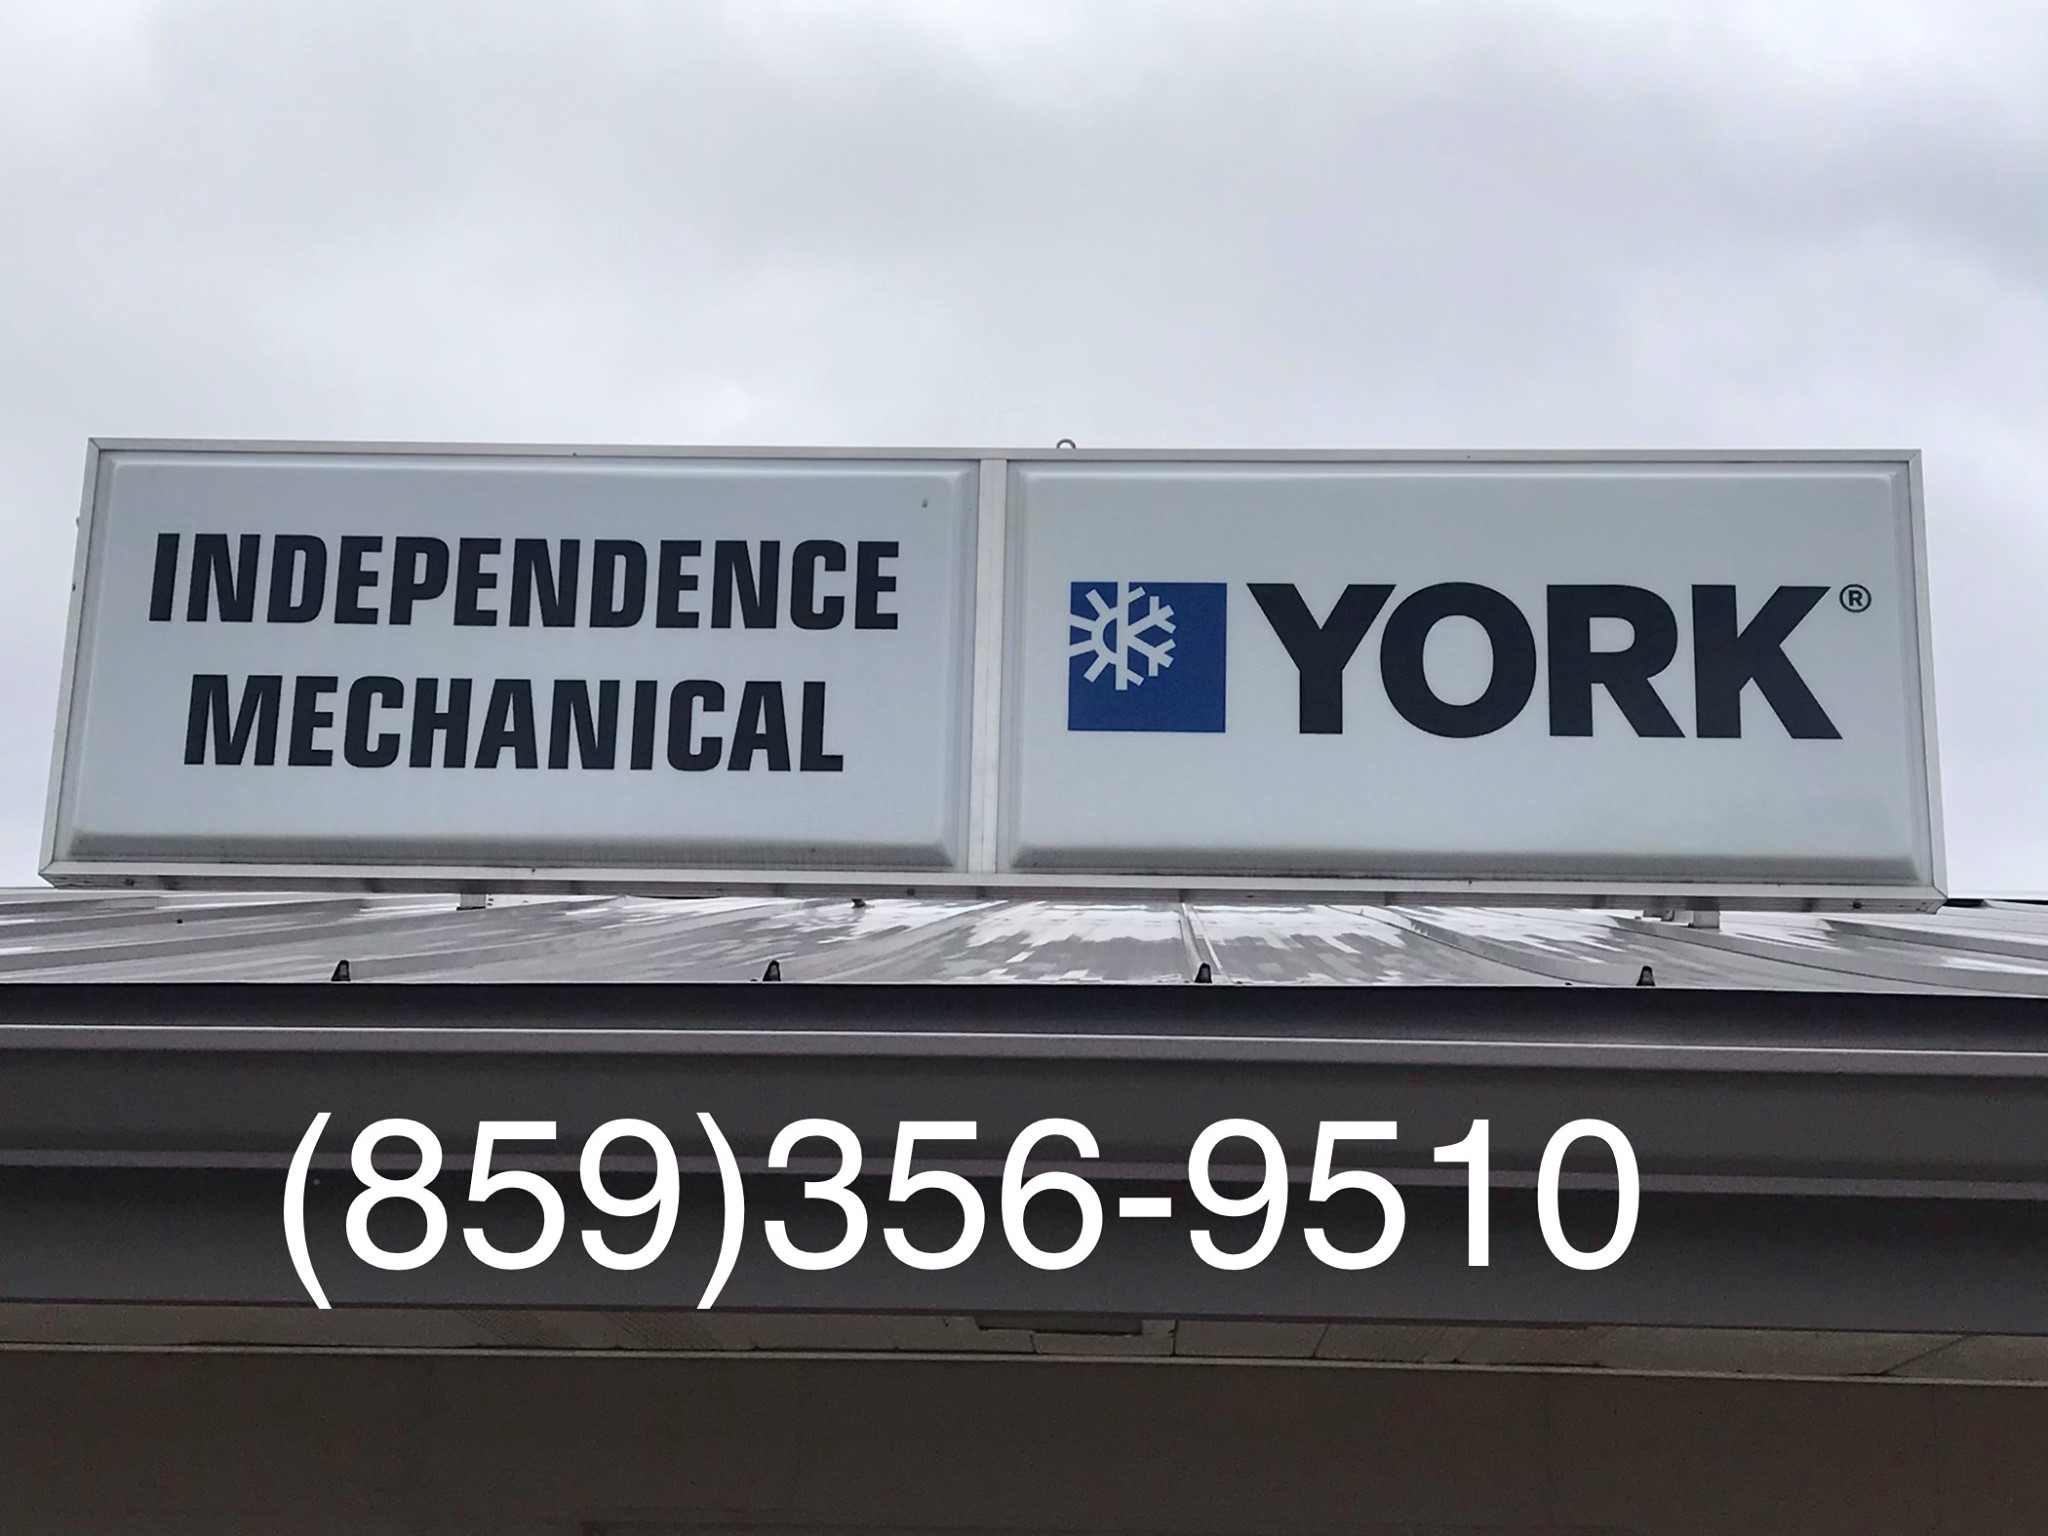 Independence Mechanical 11939 Taylor Mill Rd, Independence Kentucky 41051